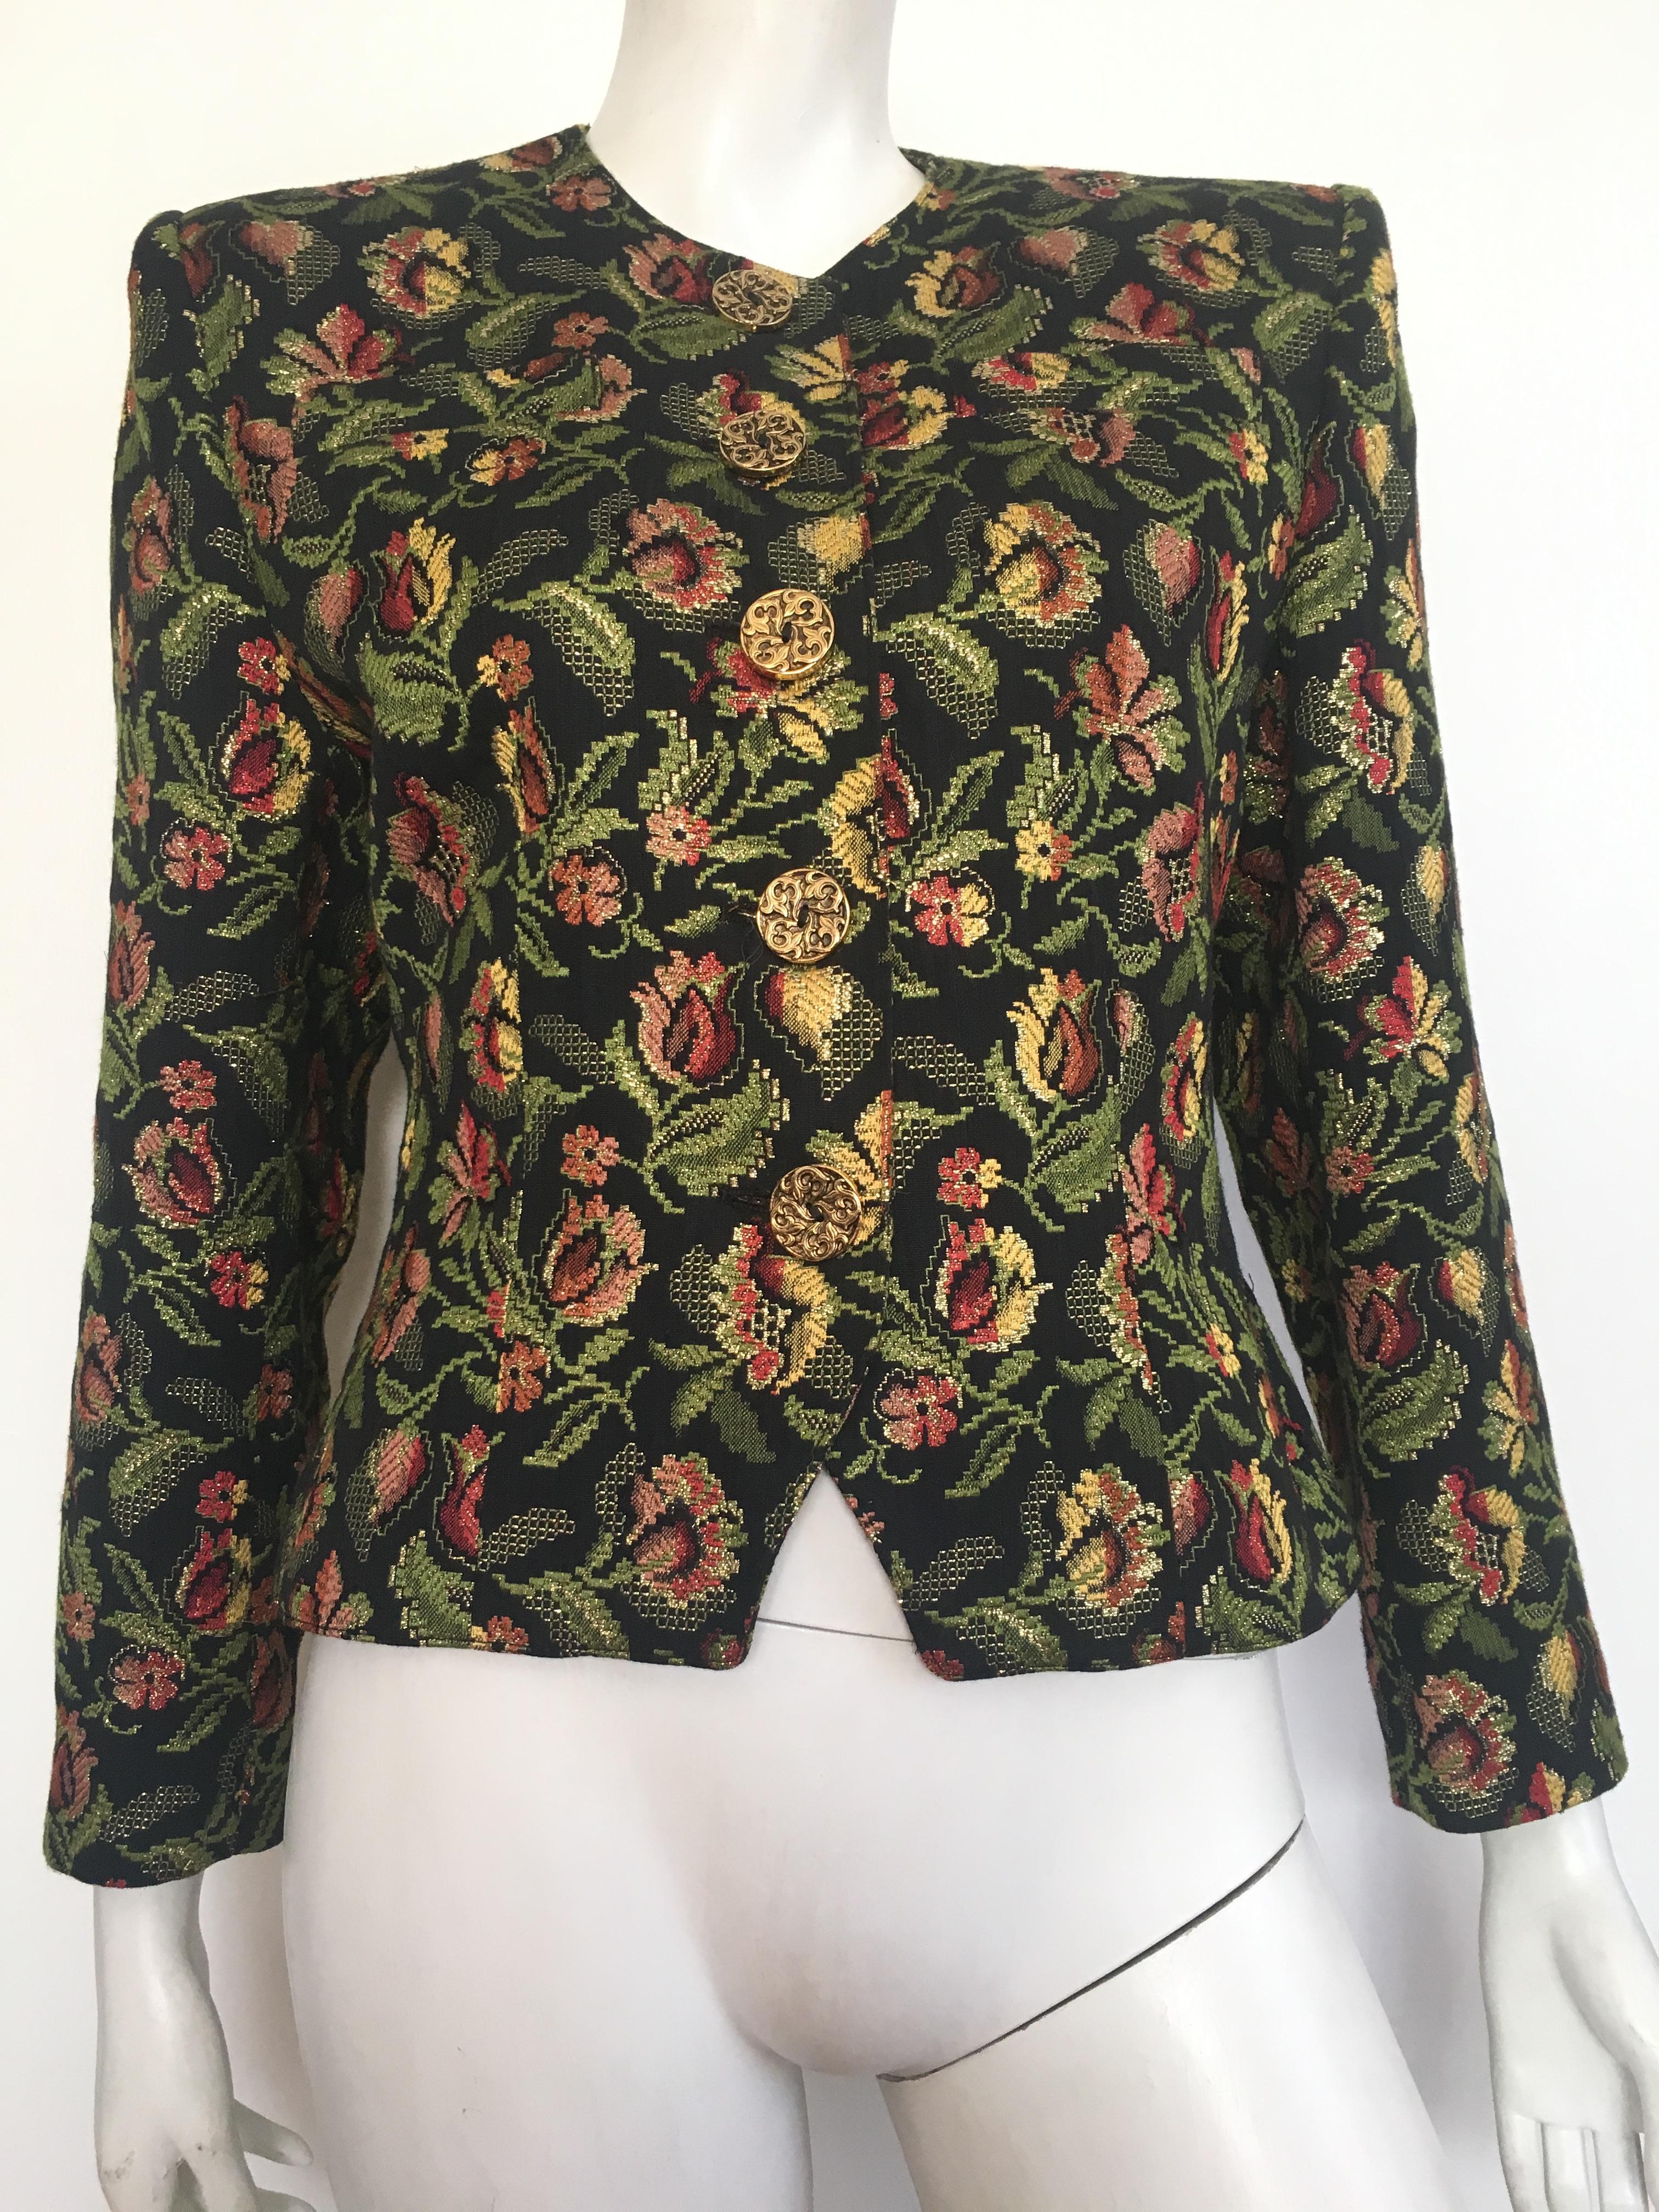 Guy Laroche 1980s brocade metallic jacket is a French size 42 and fits a size 10.  Jacket is beautifully lined.  There are two front pockets.  Mild shoulder pads.  Wear this jacket with your vintage 1980s Calvin Klein jeans or your Thierry Mugler